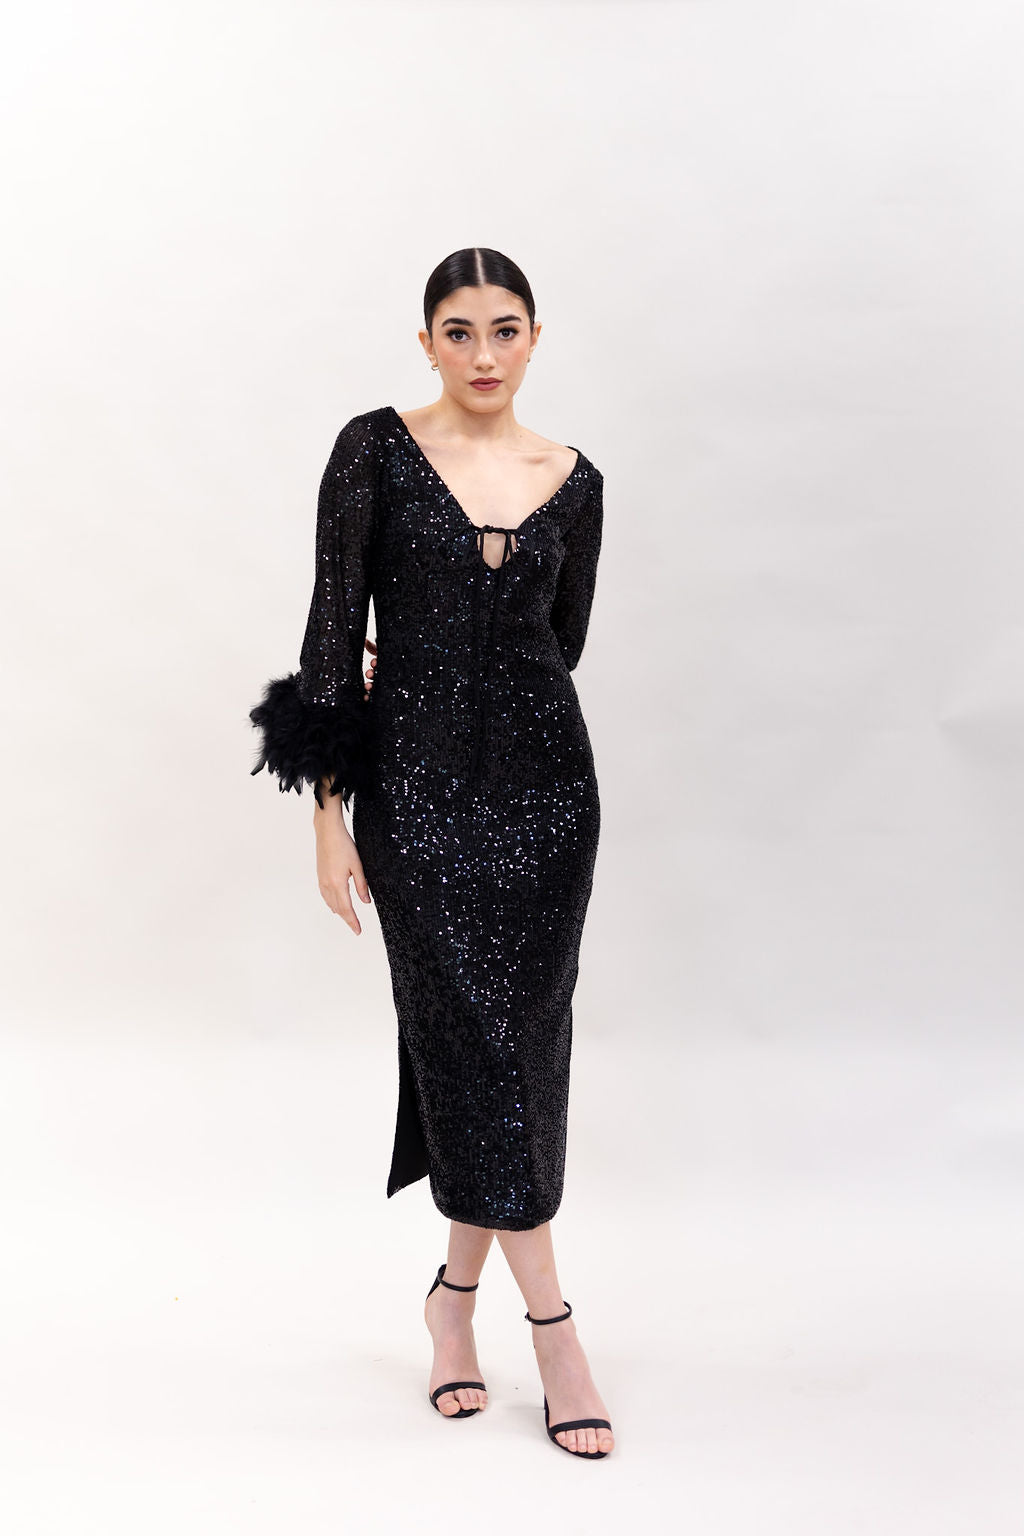 THE SEQUIN BLACK DRESS WITH FEATHERS